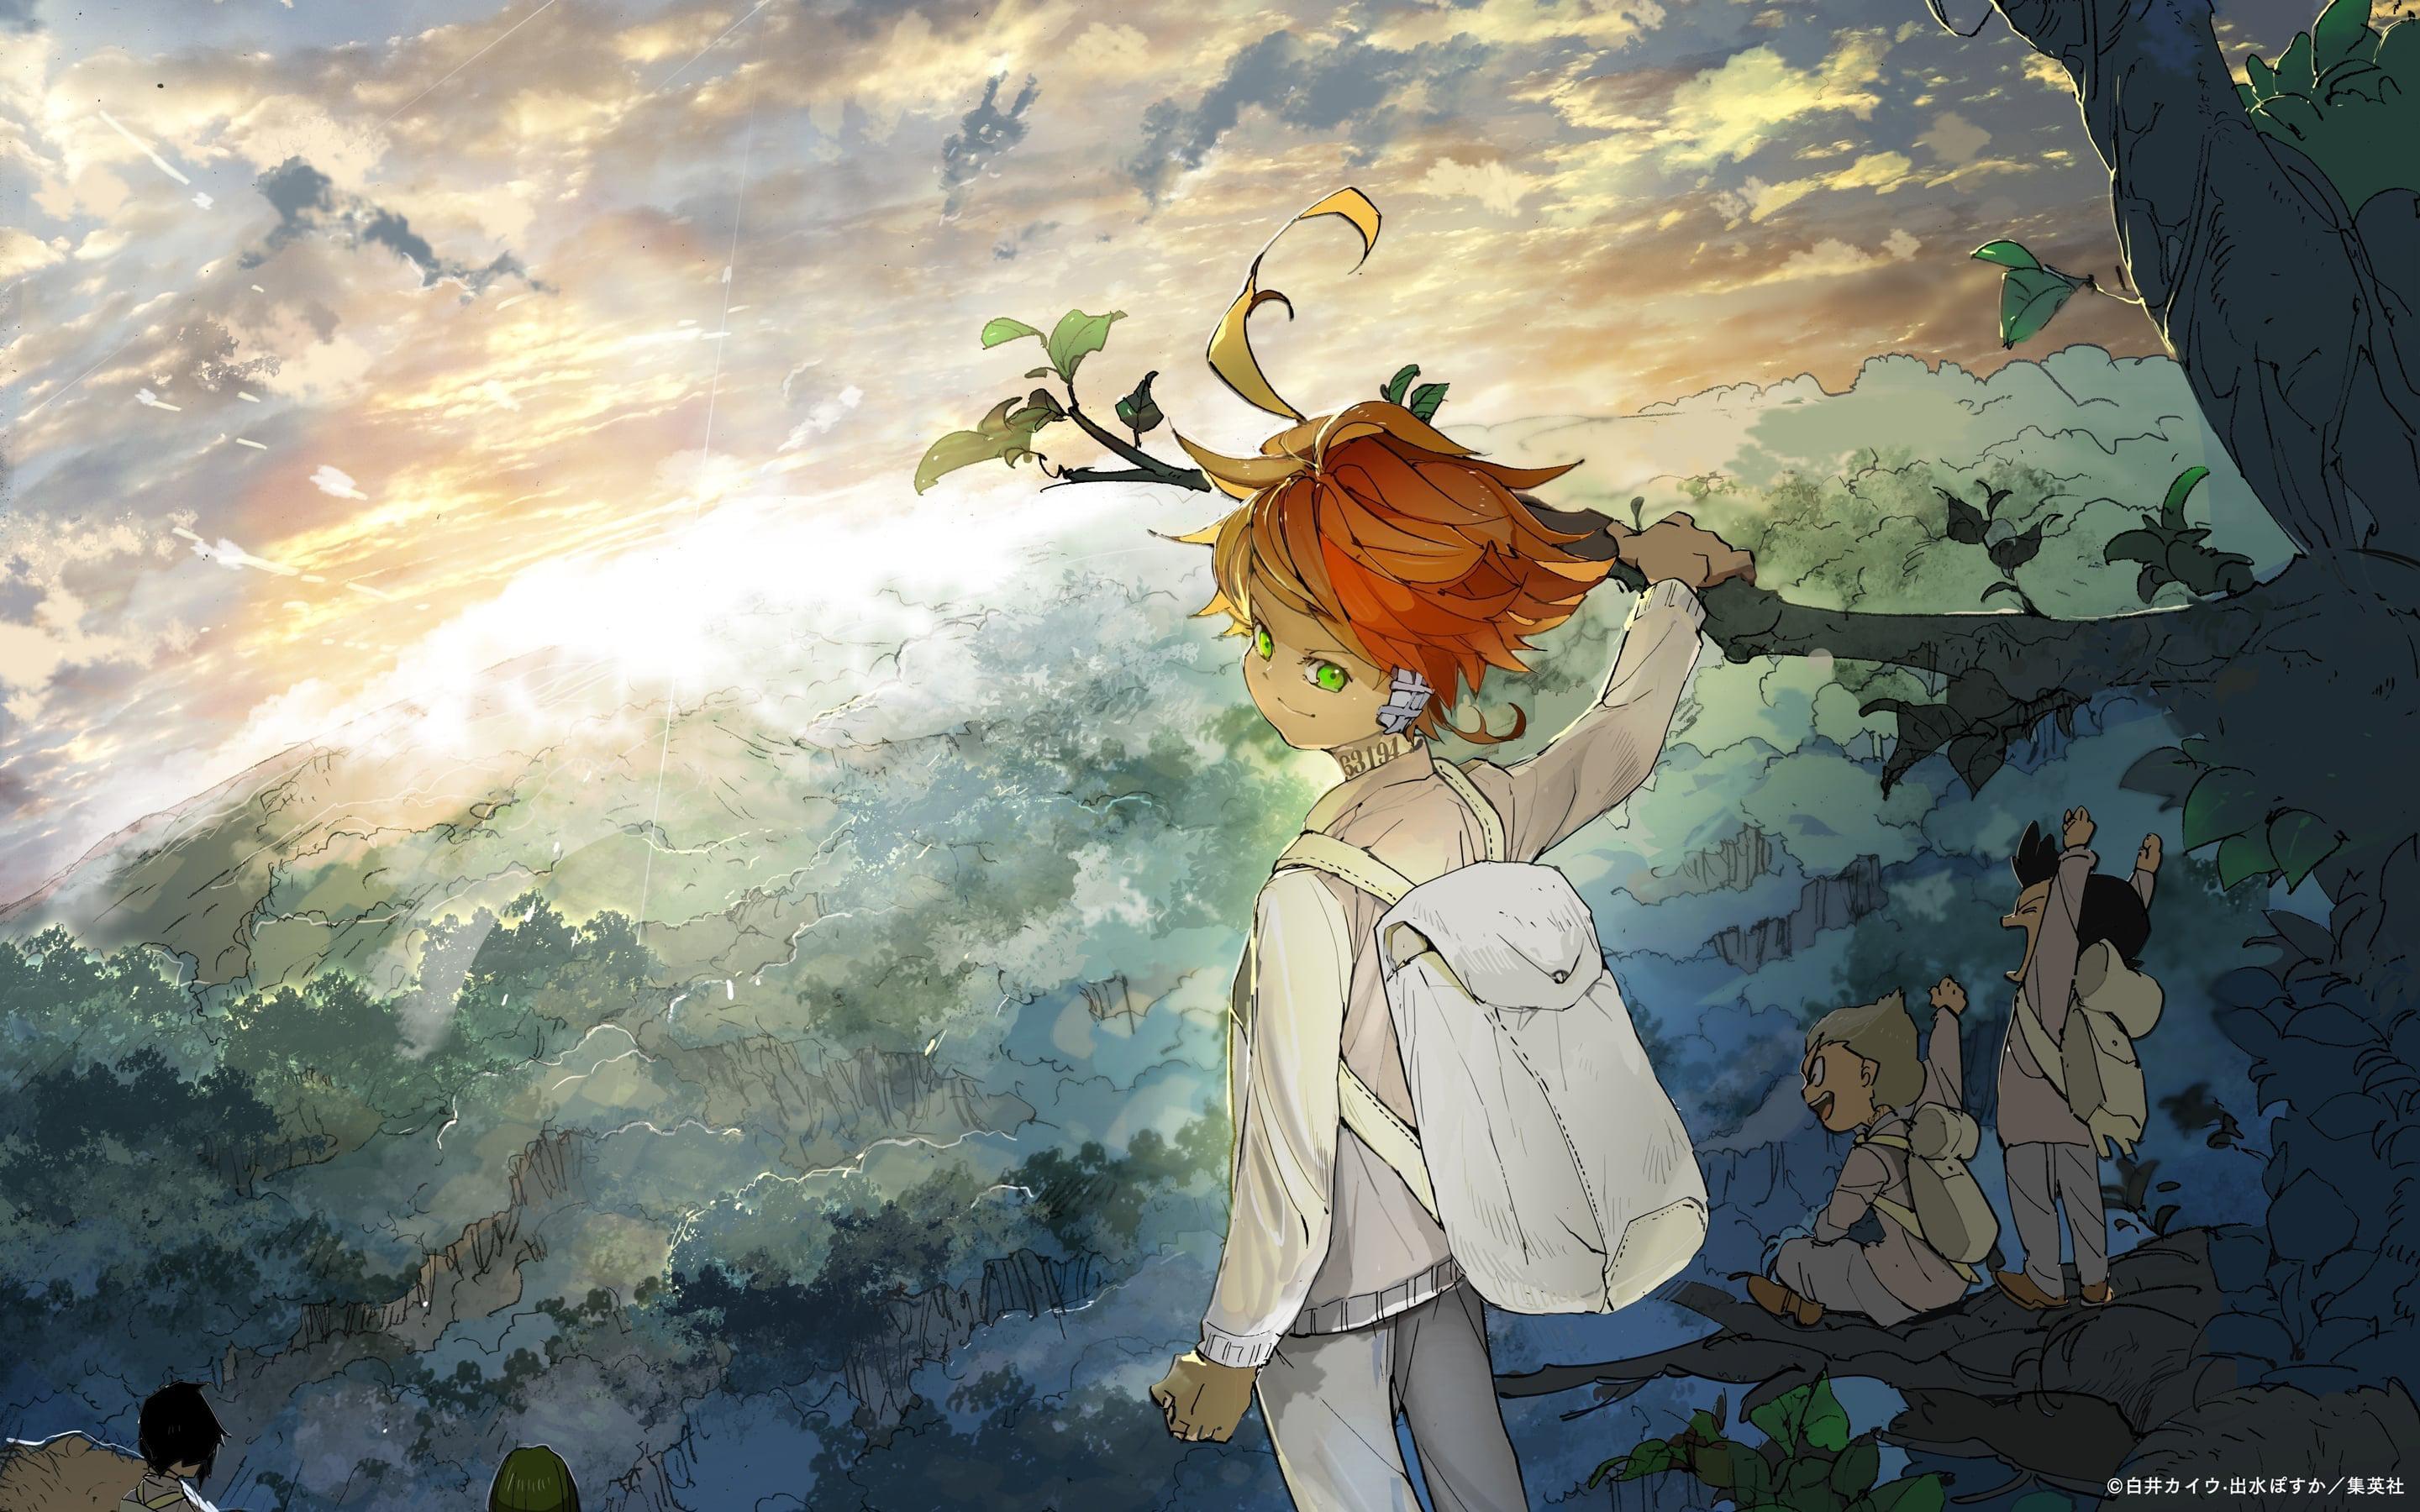 HD the promised neverland wallpapers  Peakpx